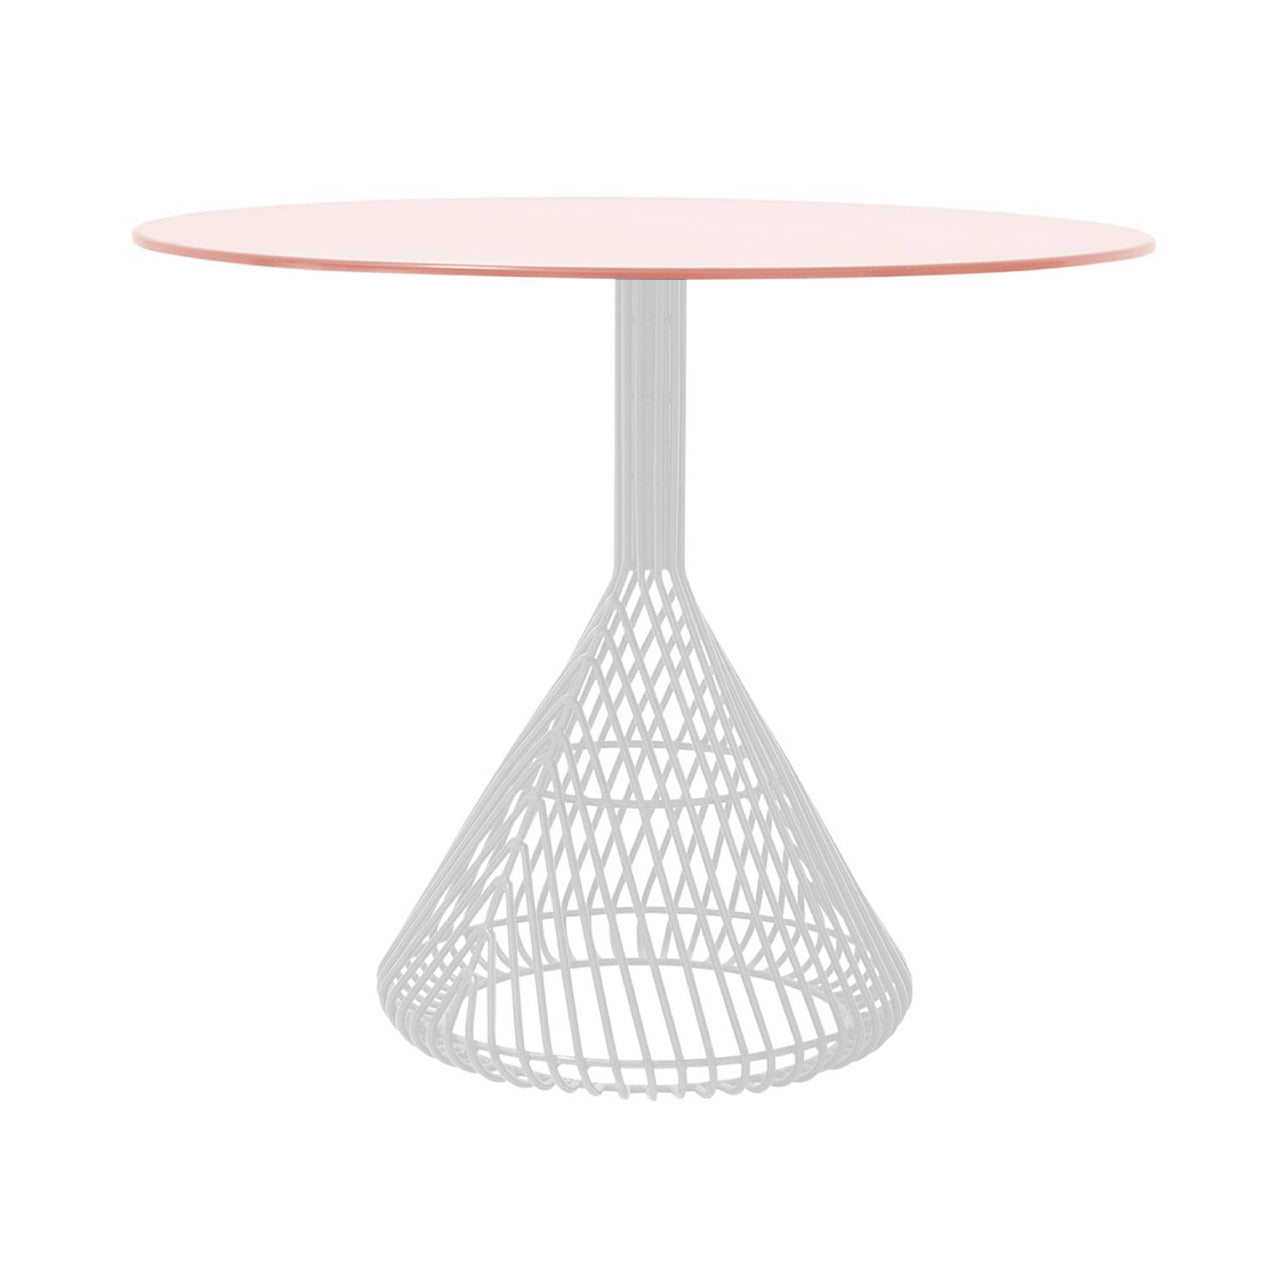 Bistro Dining Table: White + Peachy Pink Metal